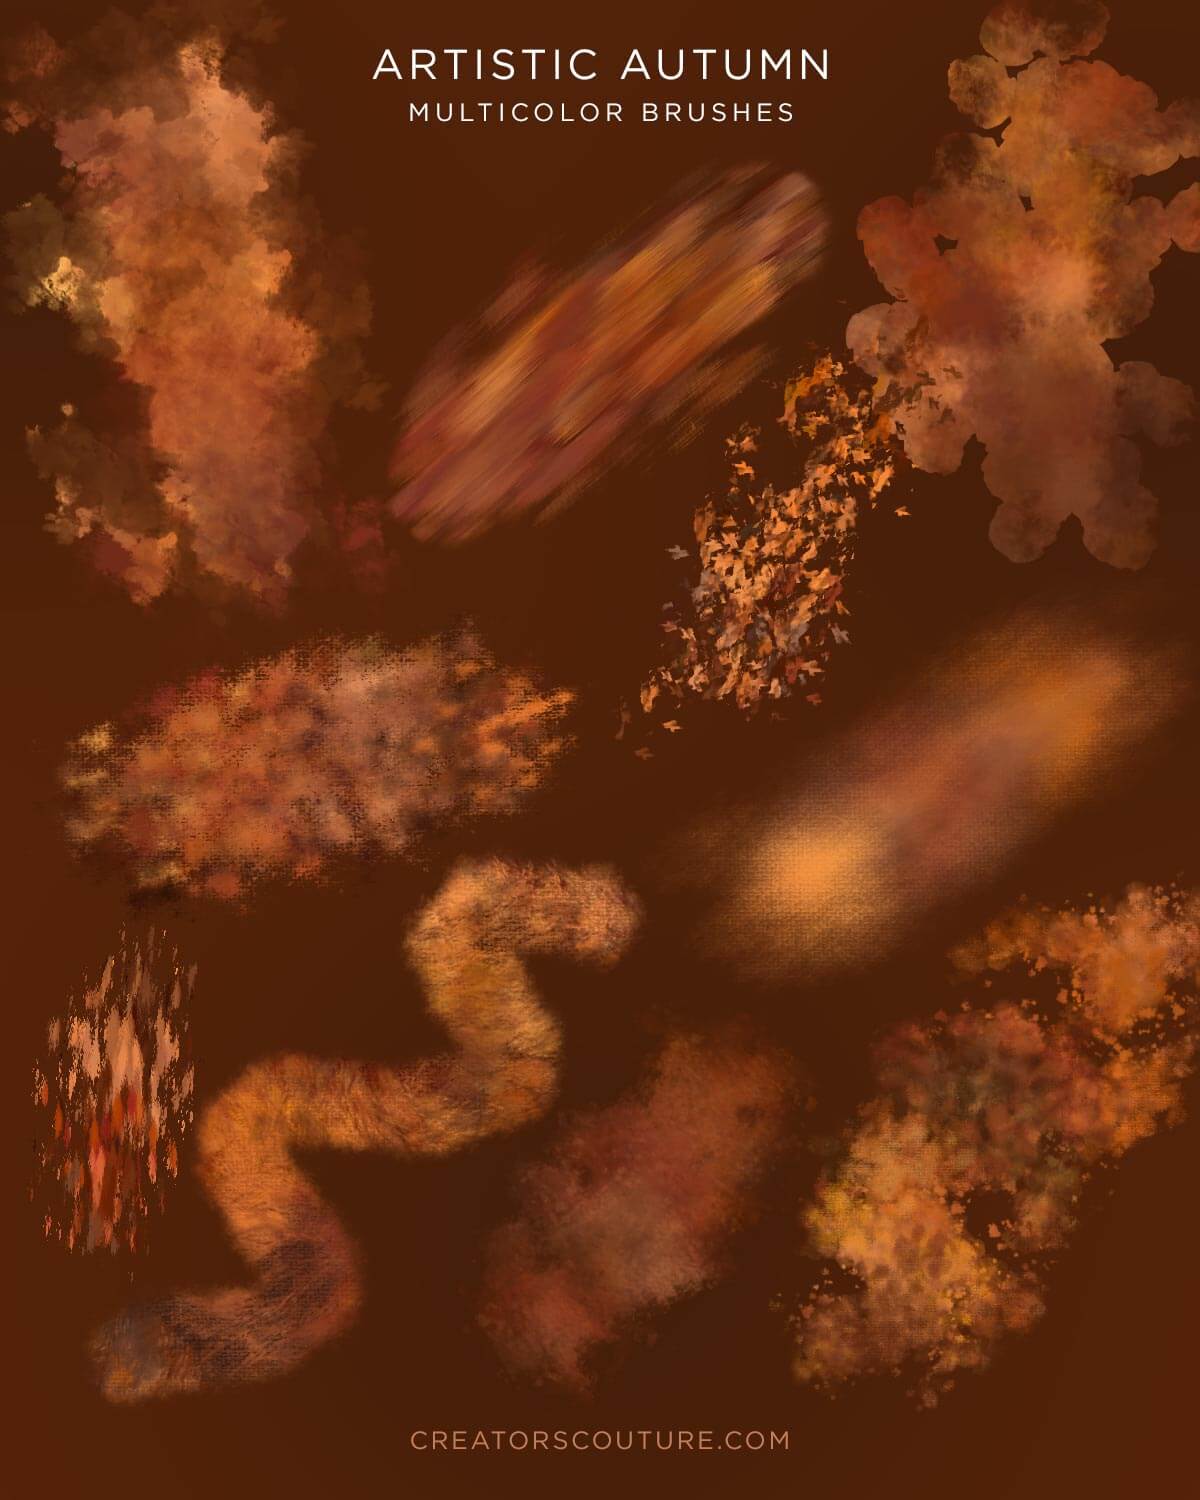  autumn and artistic multicolor photoshop brushes sample brush strokes